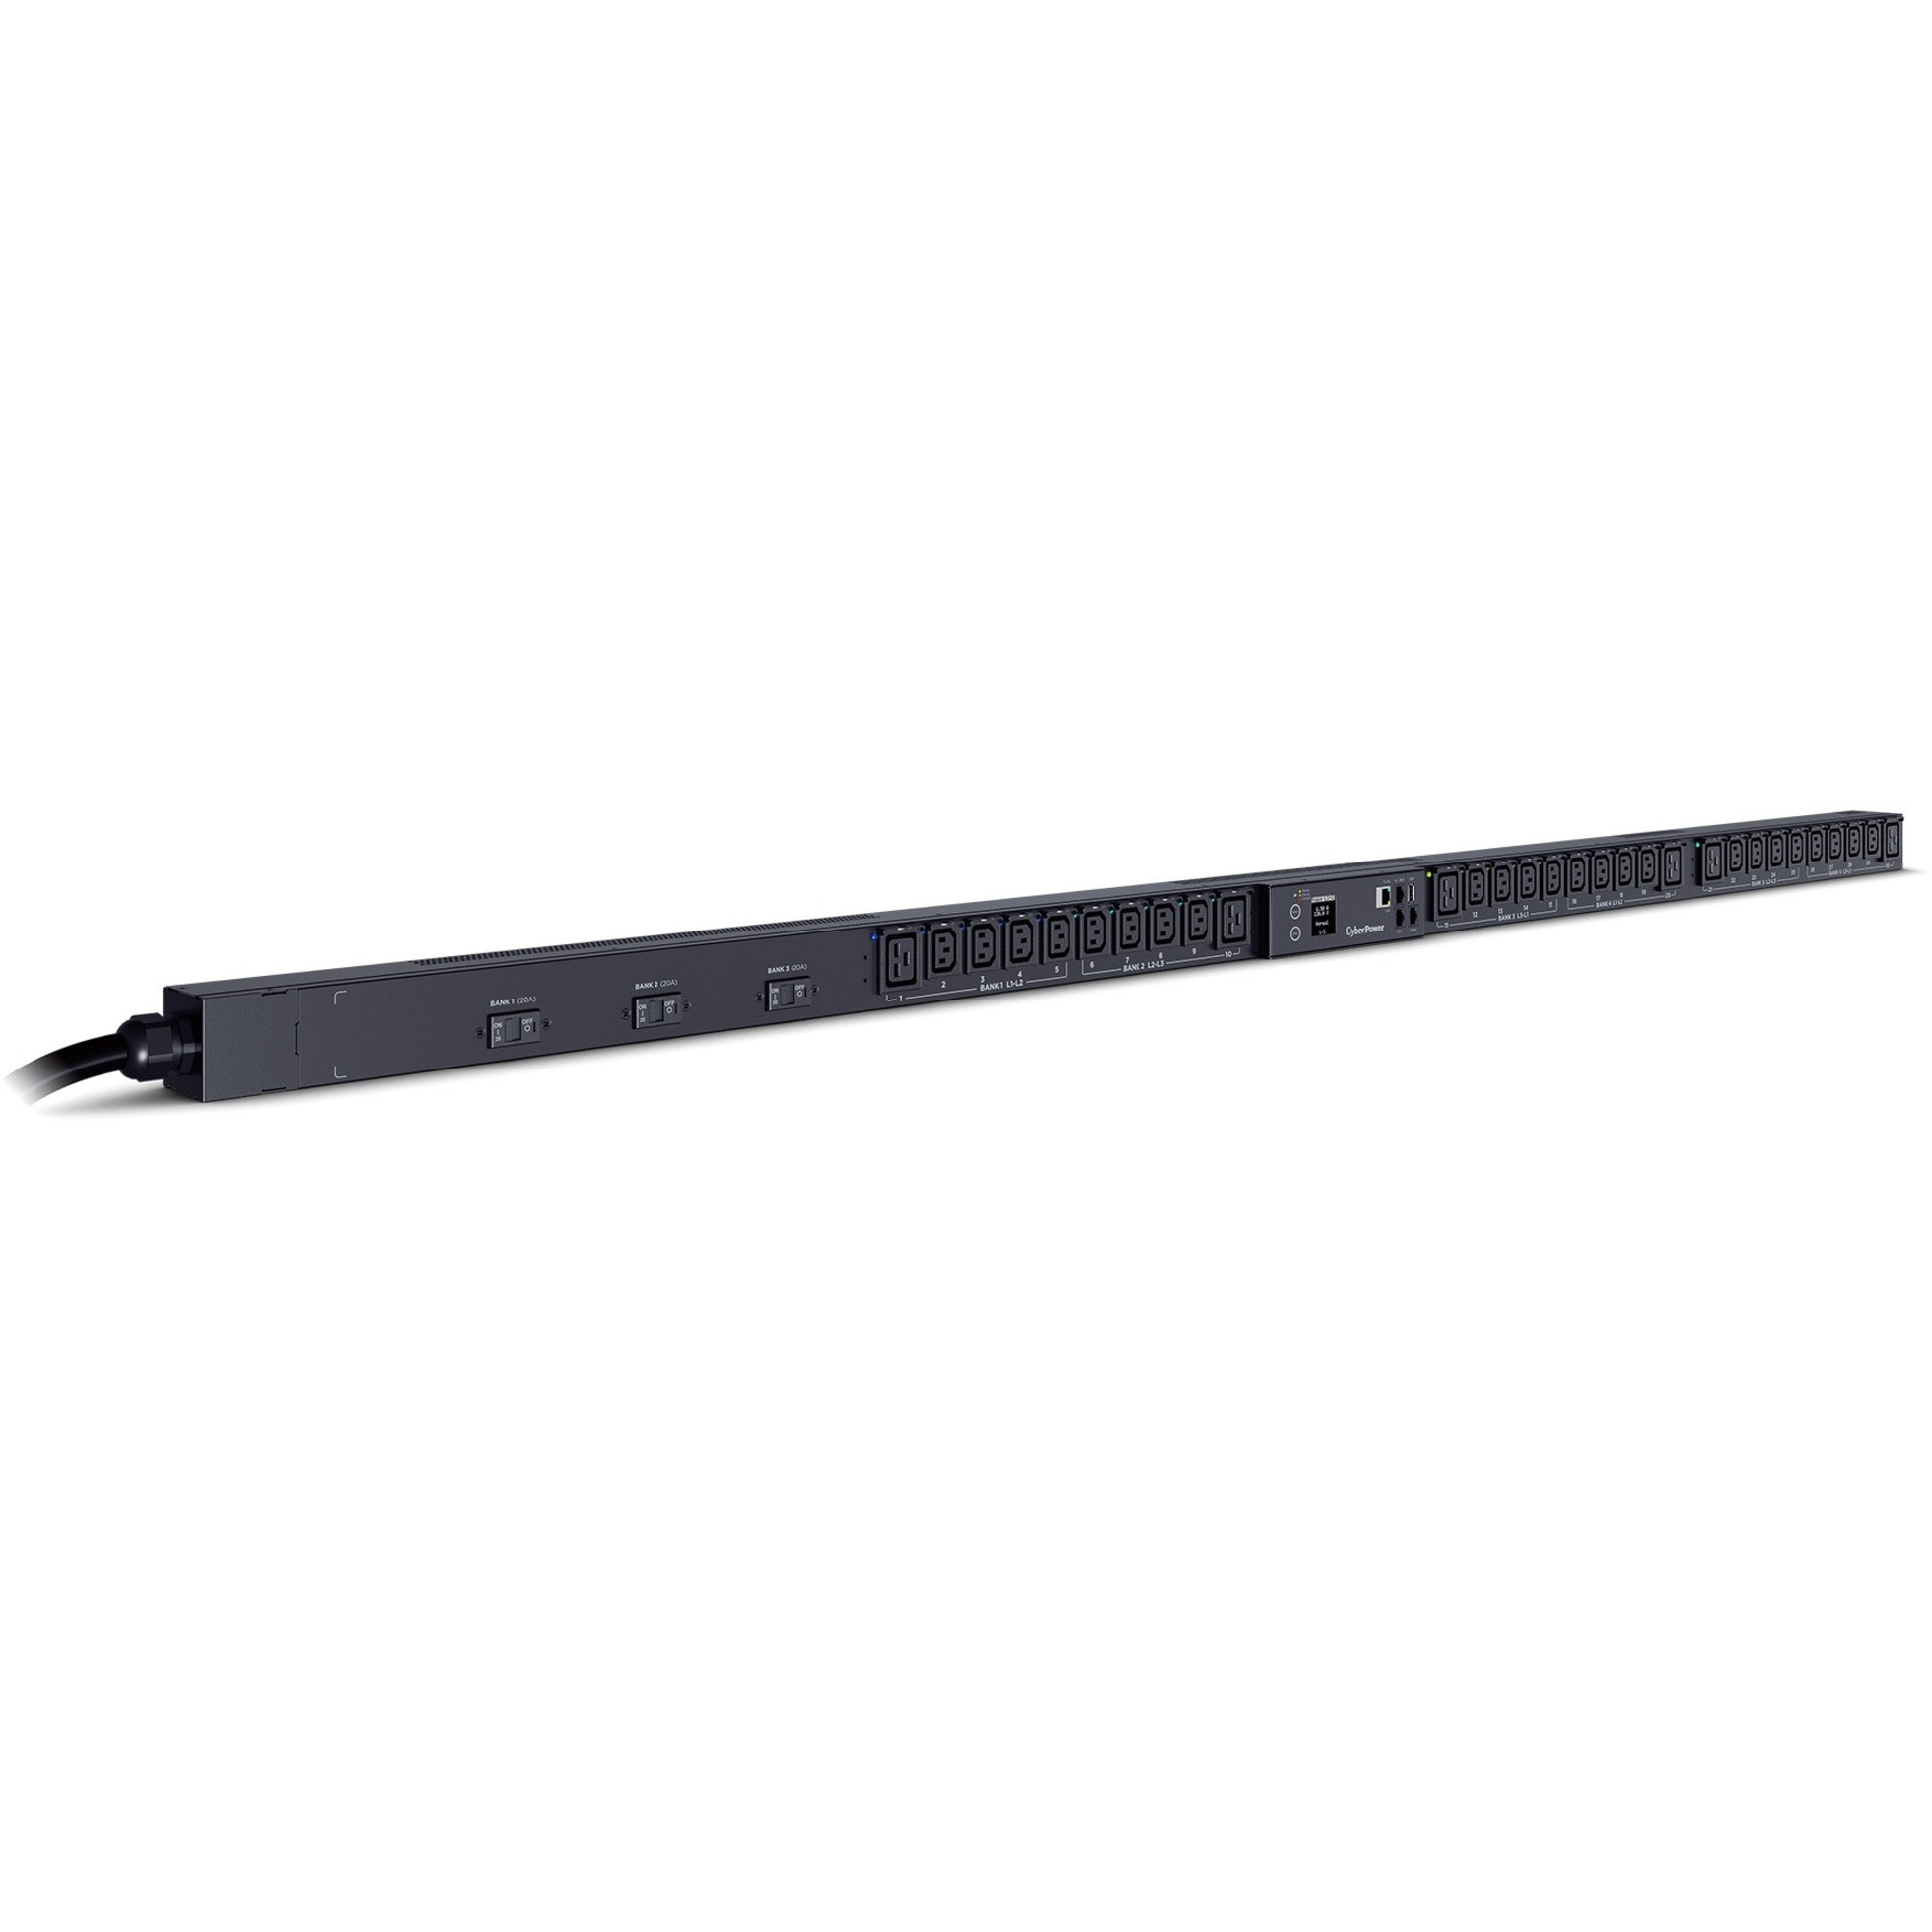 Cyber Power PDU83107 3 Phase 200240 VAC 50A Switched Metered-by-Outlet PDU30 Outlets, 10 ft, Hubbell CS8365C, Vertical, 0U, LCD,  Warra… PDU83107